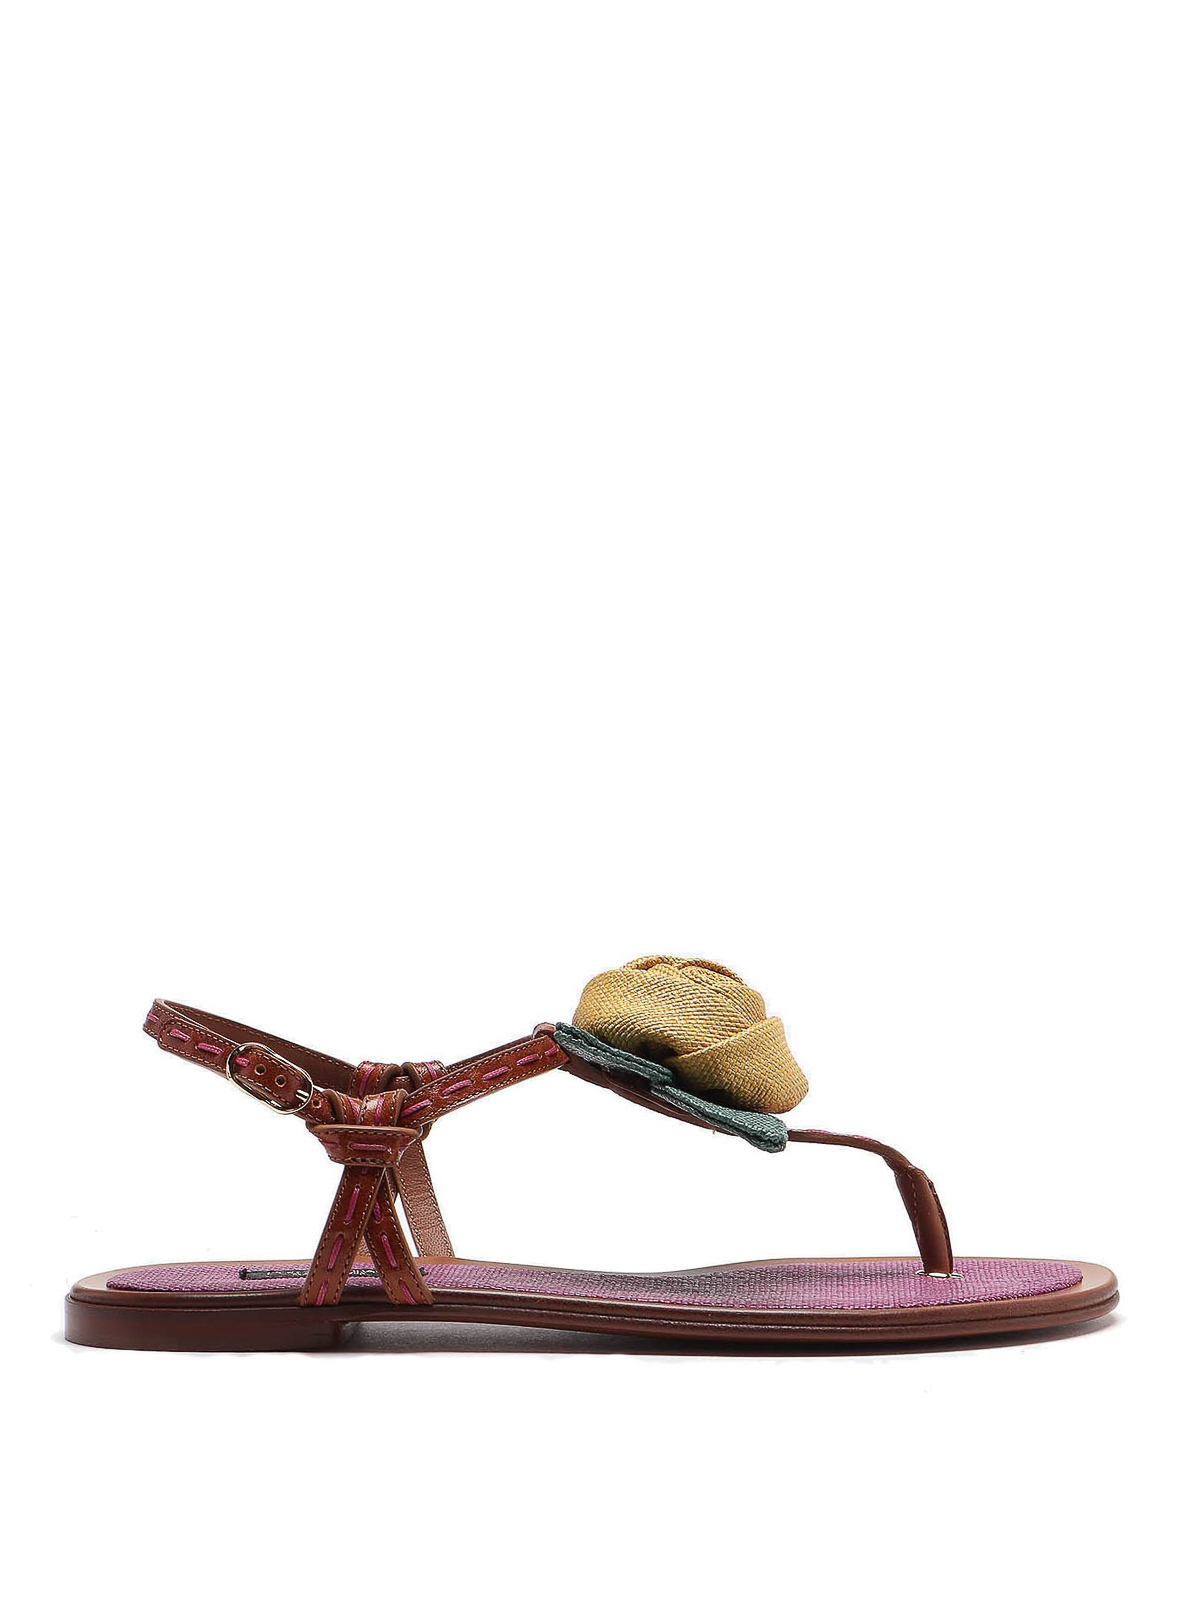 DOLCE & GABBANA FLOWER DETAIL LEATHER THONG SANDALS